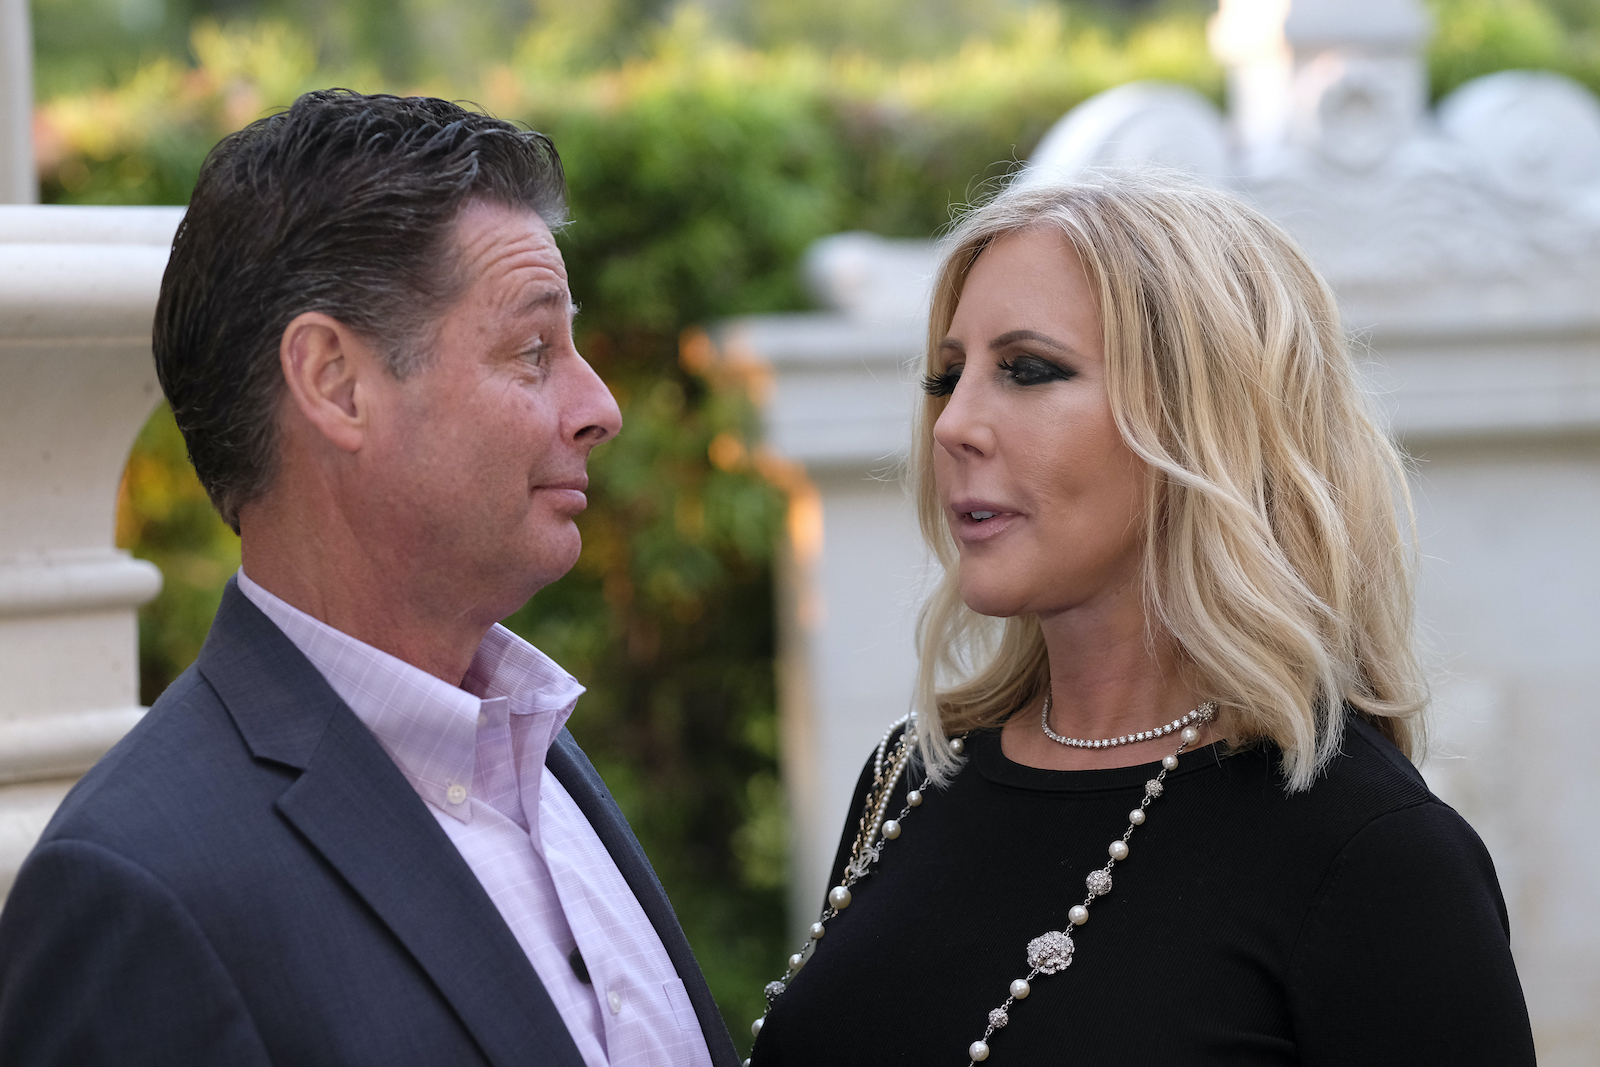 Vicki Gunvalson's boyfriend Steve Lodge seems to have already moved on from their relationship